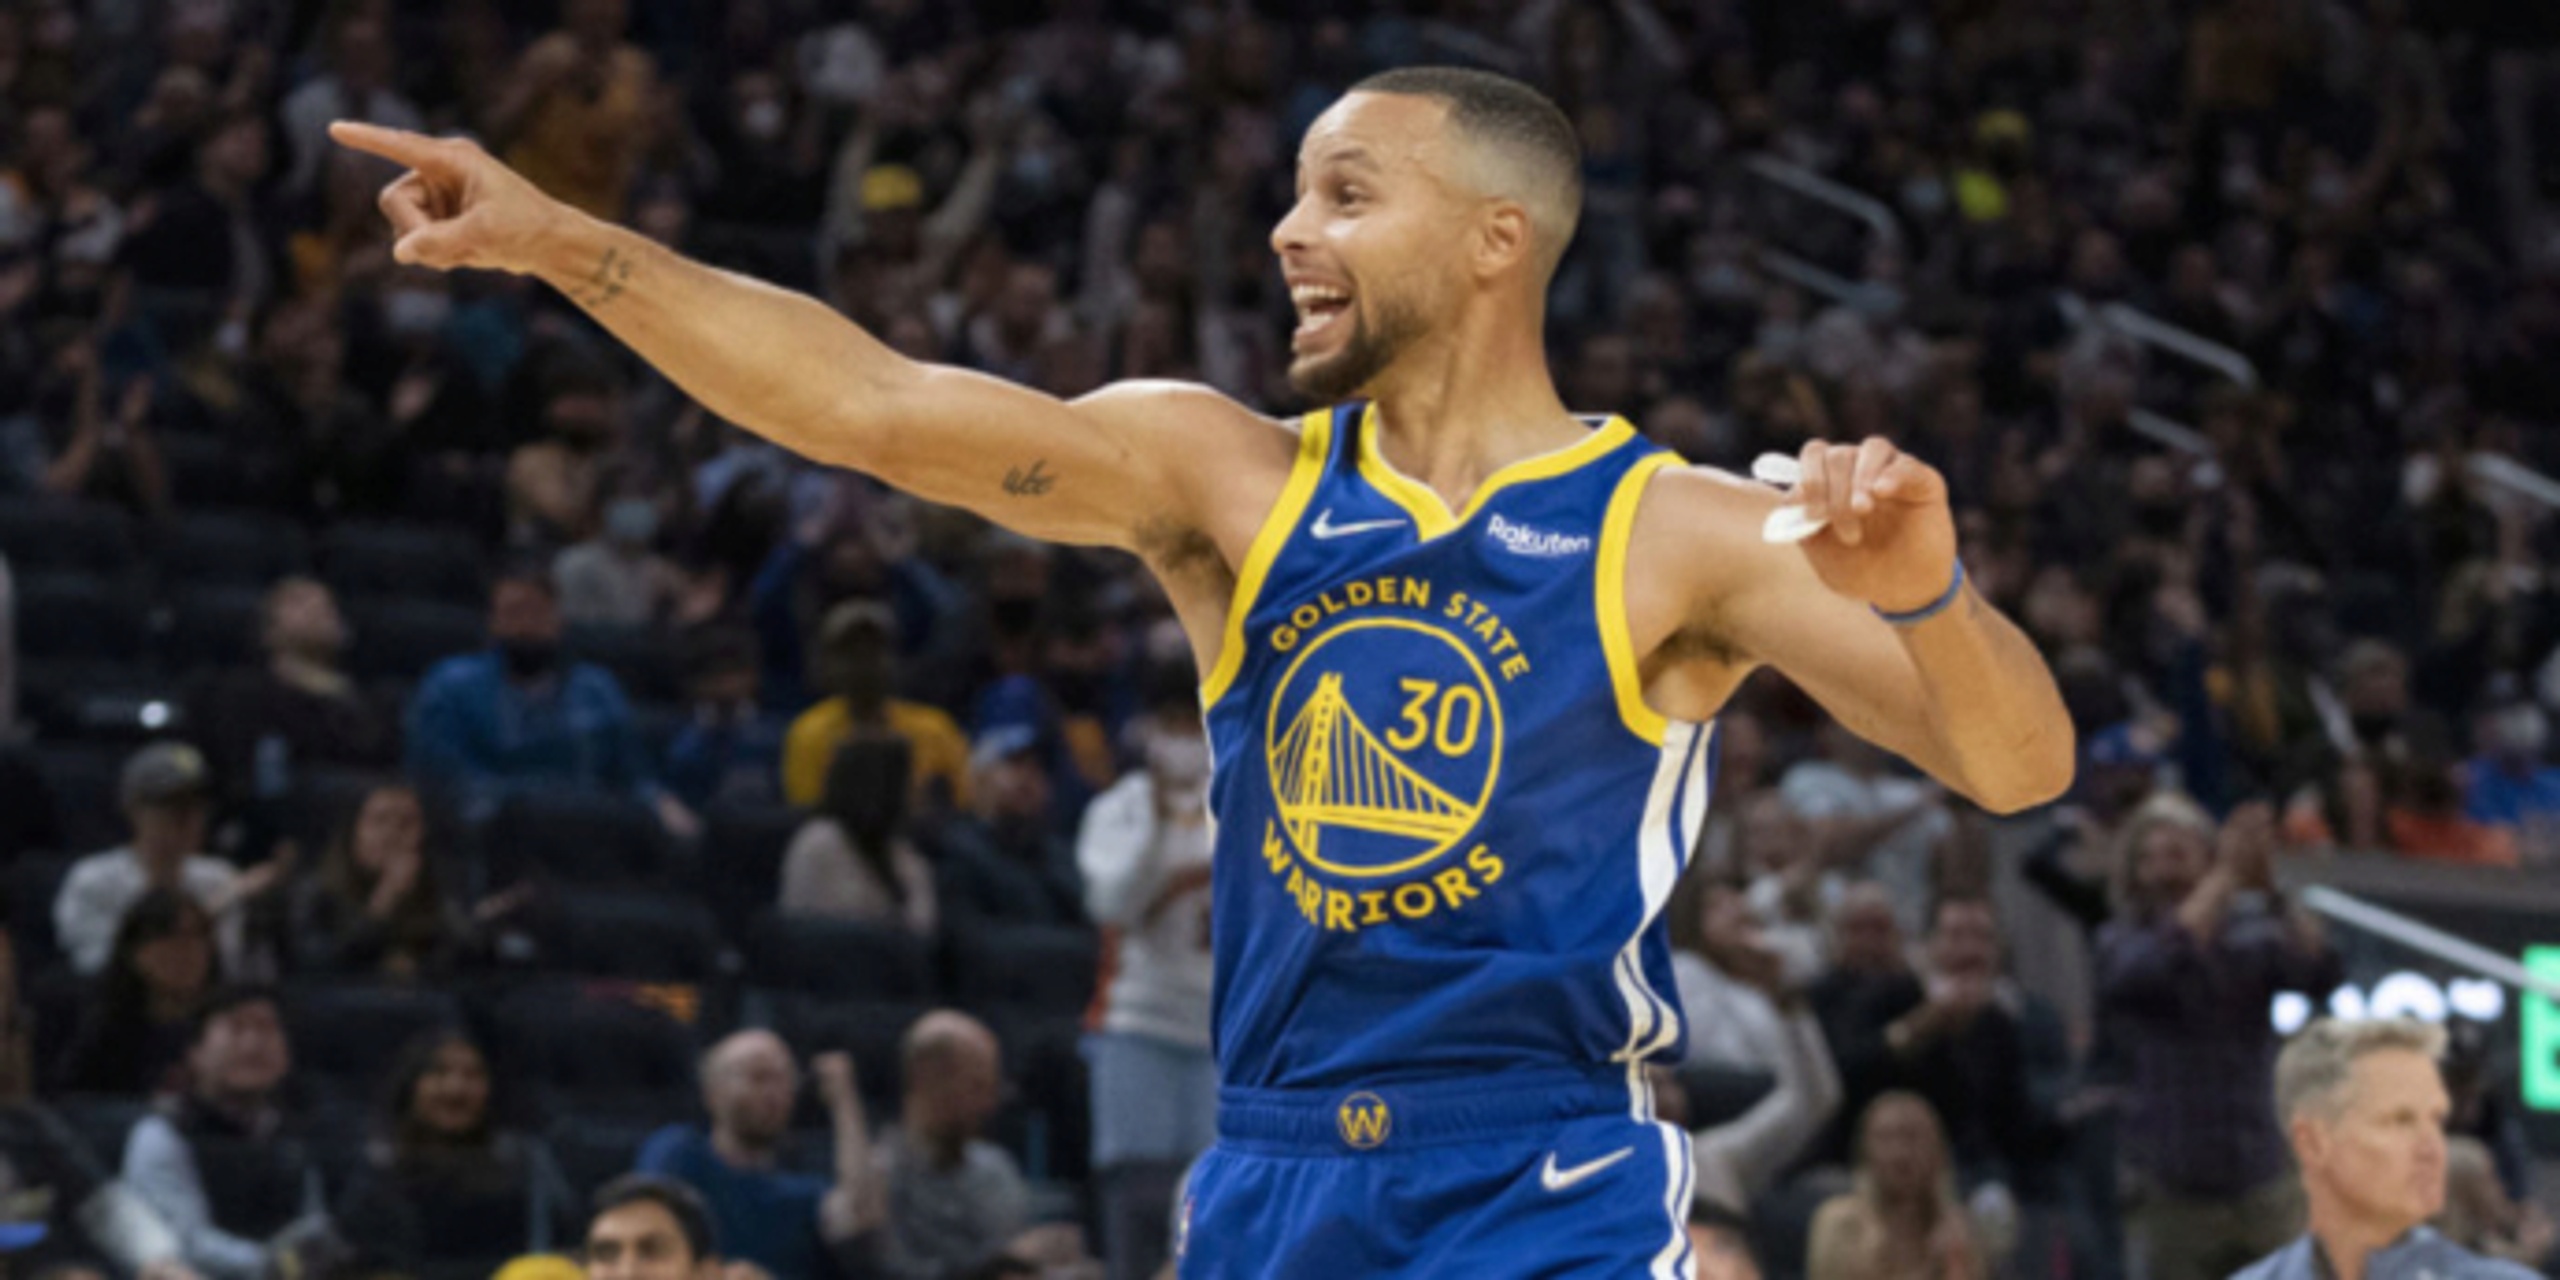 Steph Curry beat Ray Allen’s record, but absolutely crushed his pace